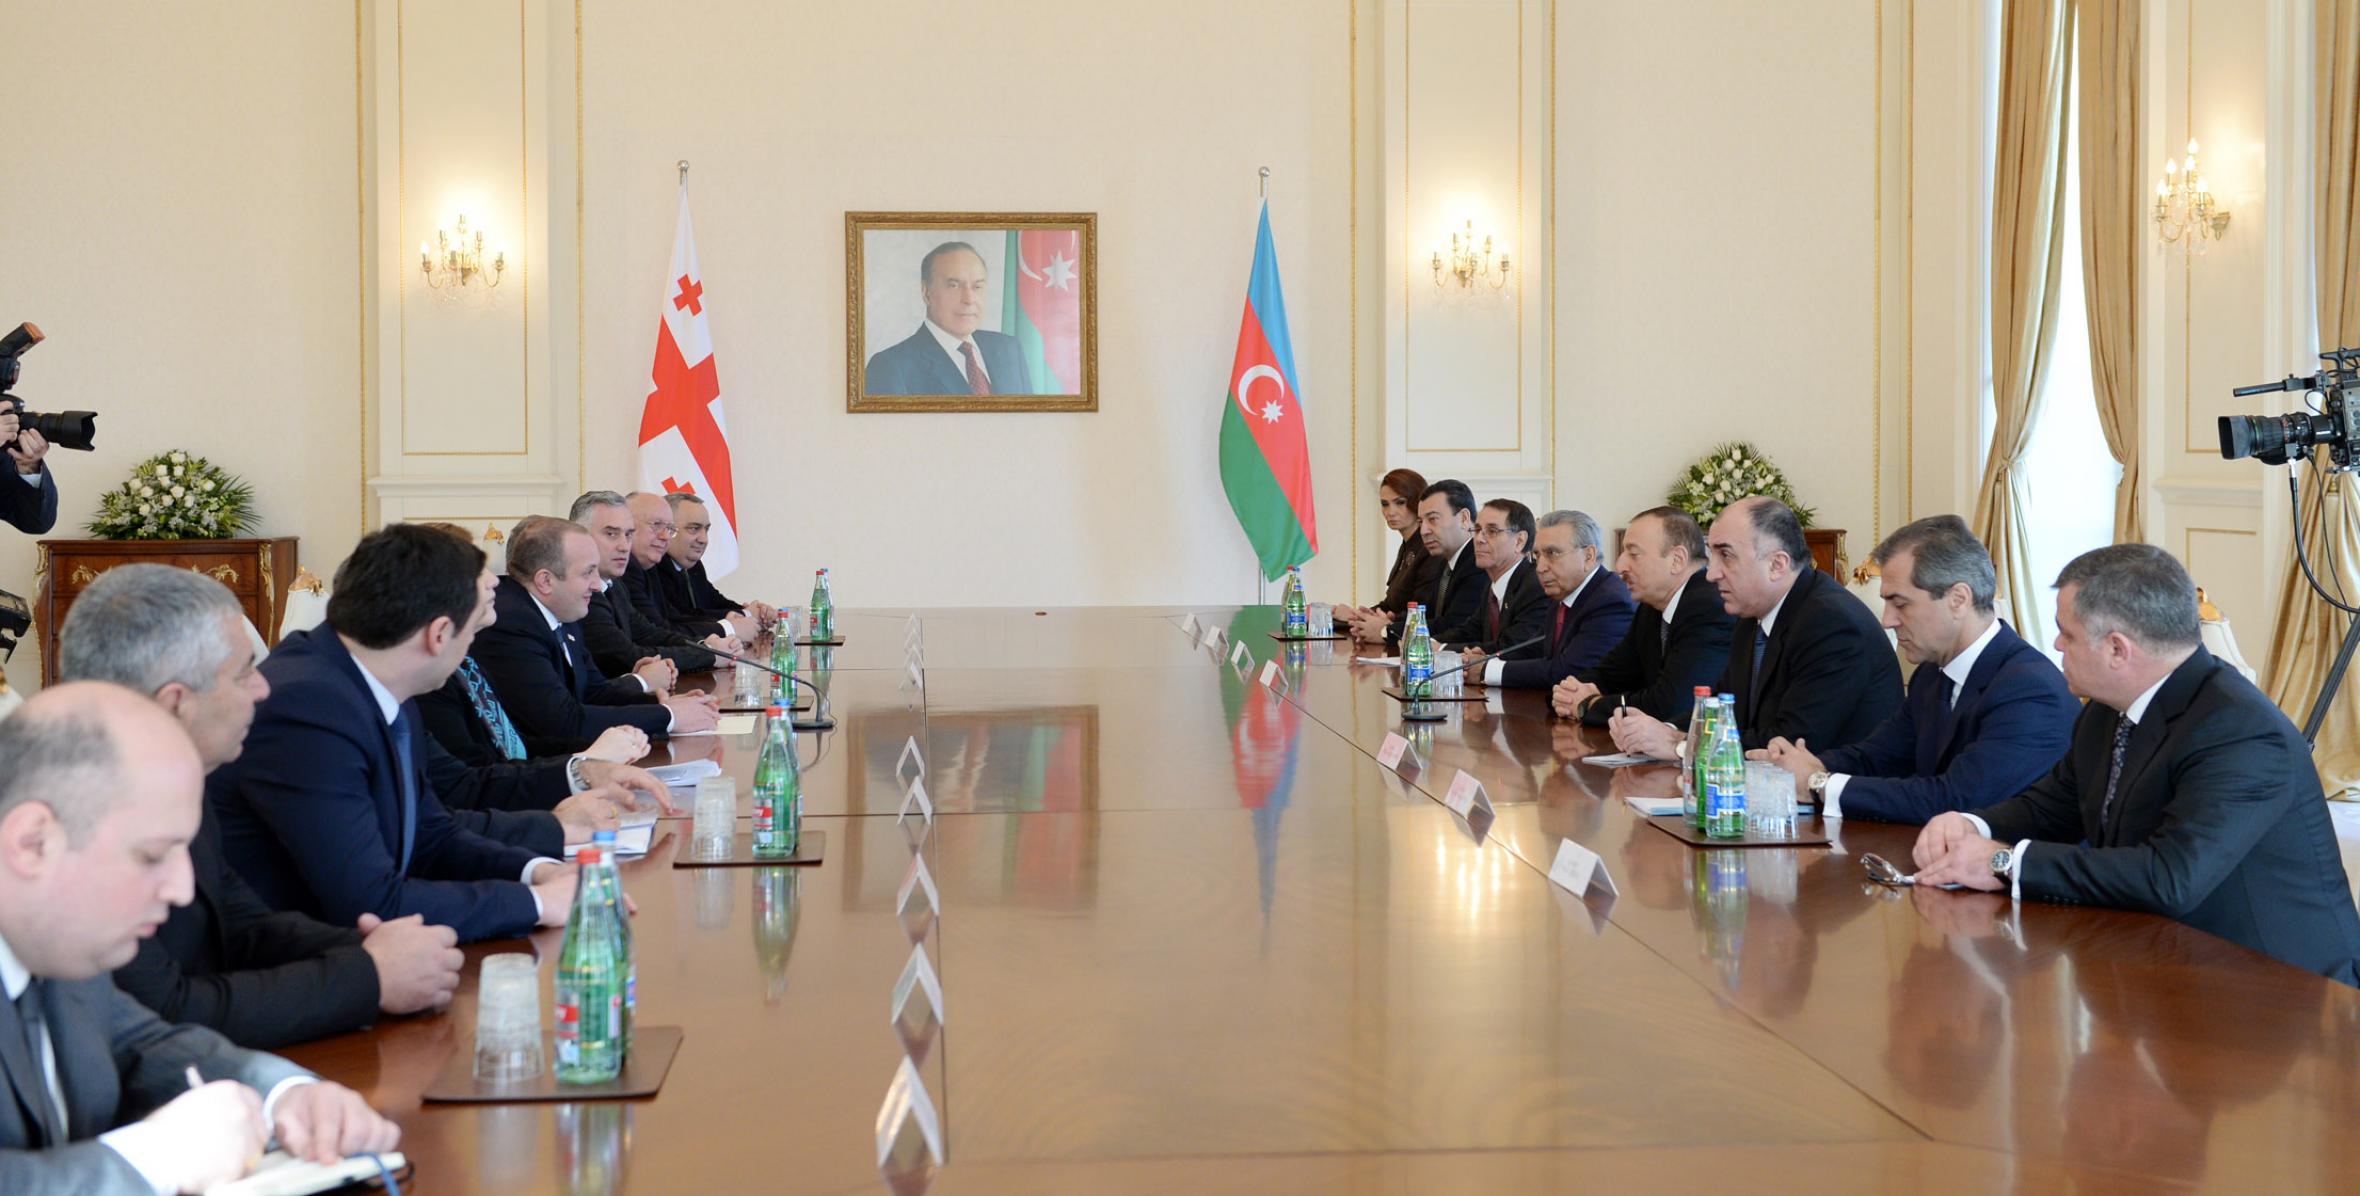 Ilham Aliyev met with President of Georgia Giorgi Margvelashvili in an expanded format with the participation of delegations